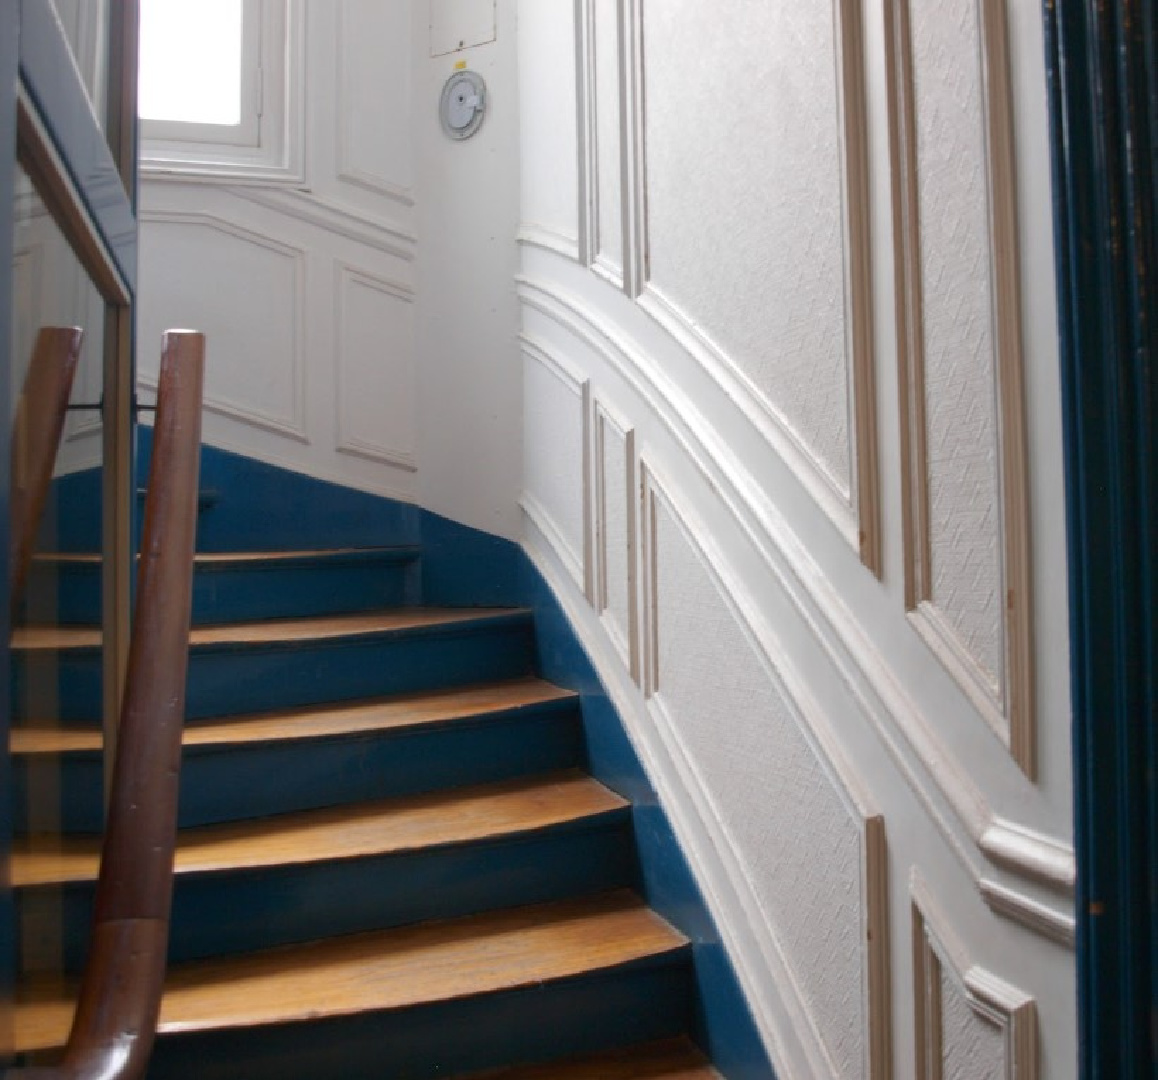 Stairway with paneled molding and royal blue trim in a Paris apartment building near Notre Dame - Hello Lovely Studio.